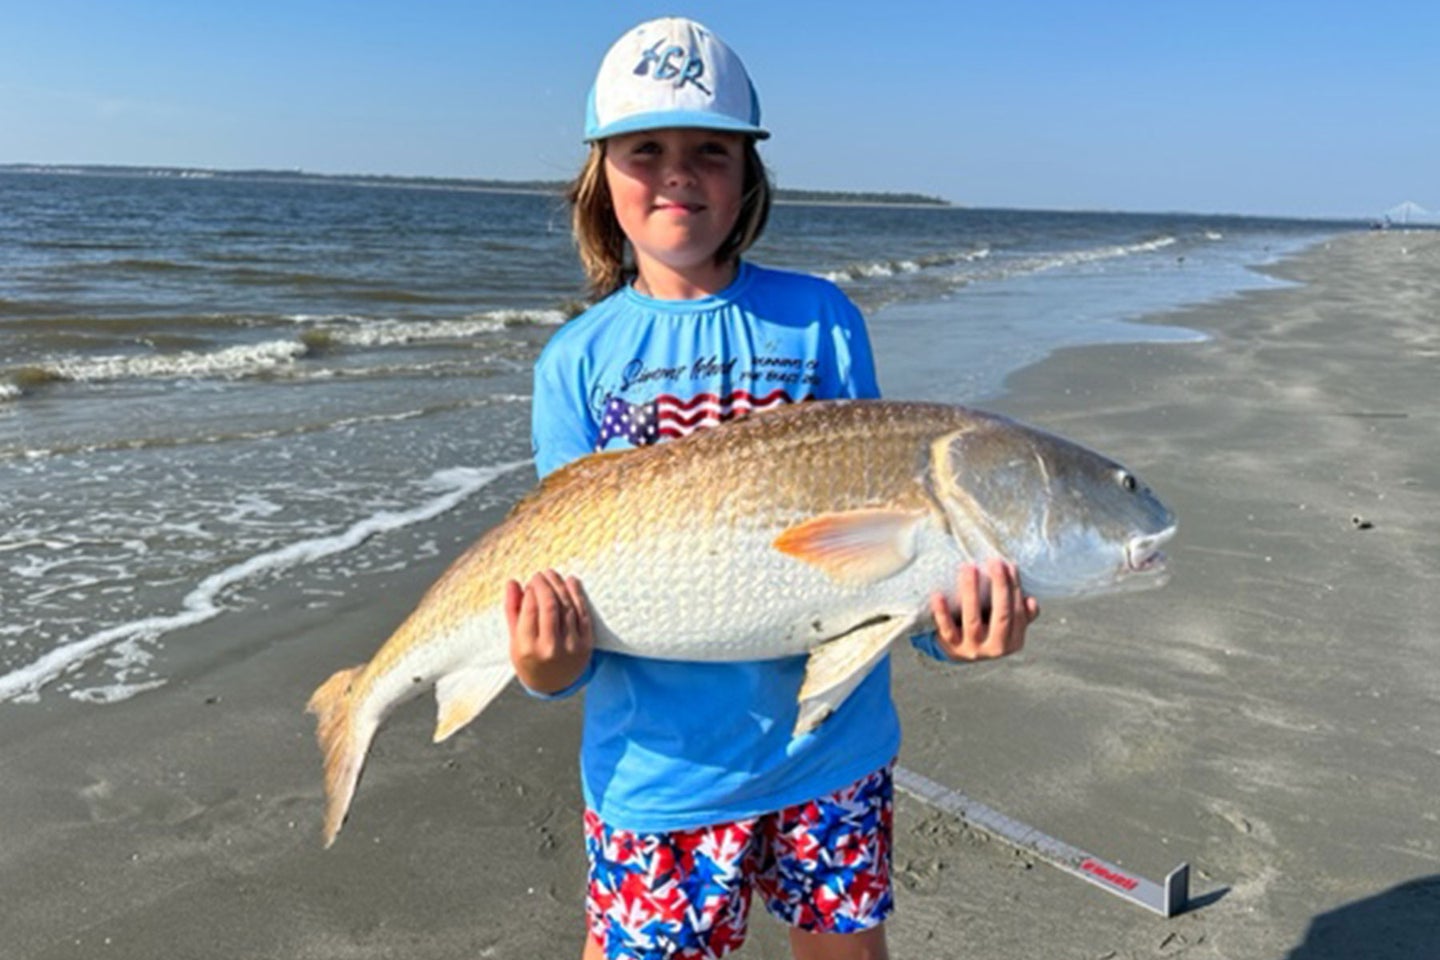 A youth angler poses with a record-setting red drum on St. Simons Island, Georgia.